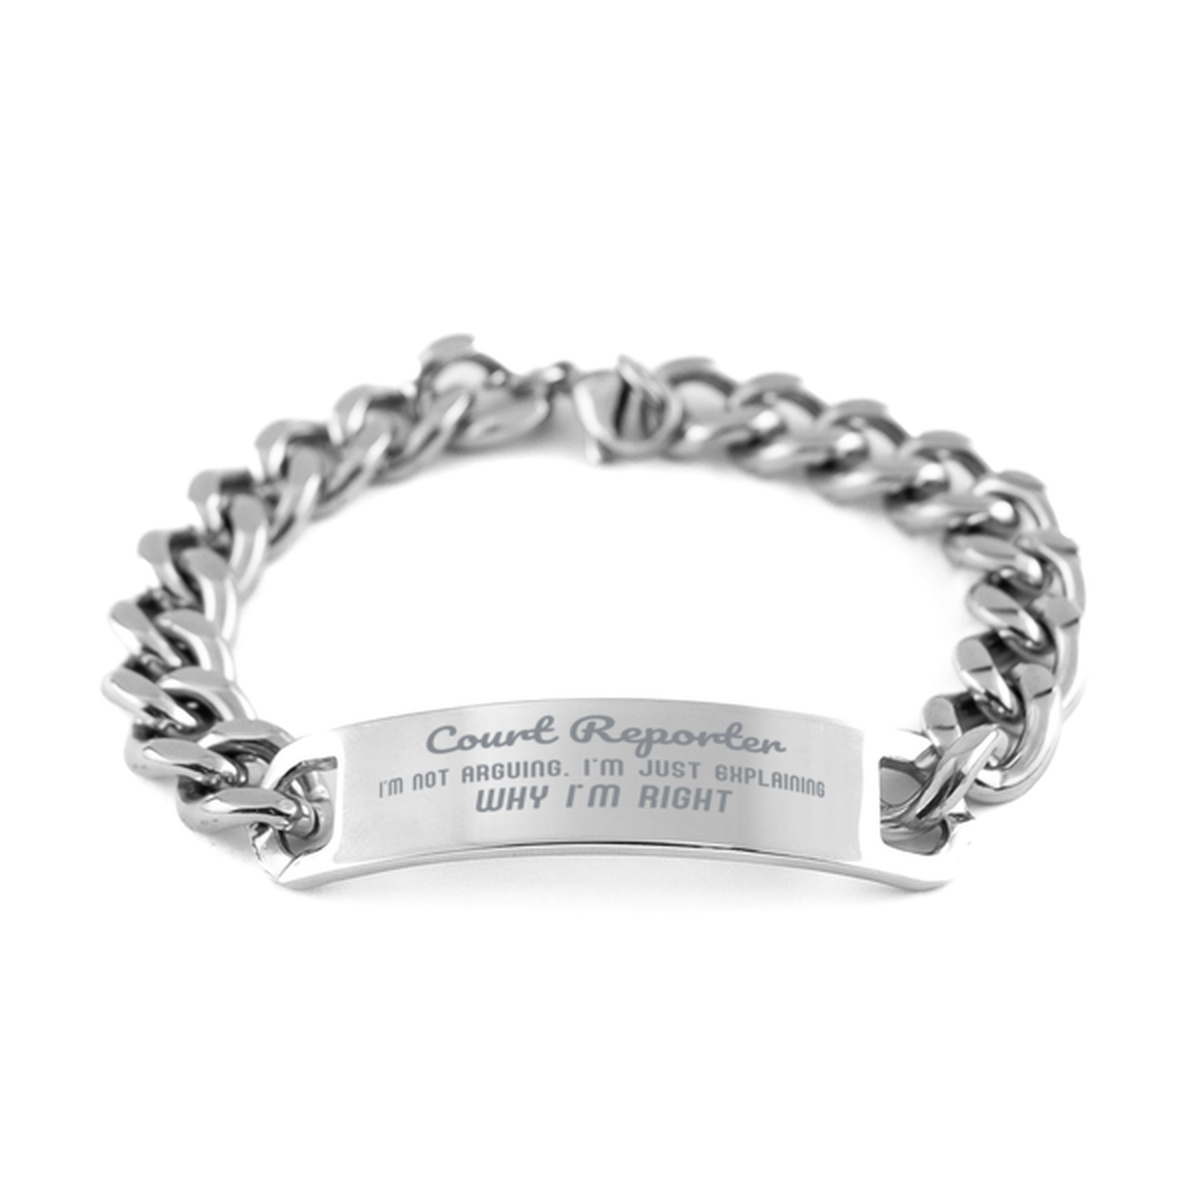 Court Reporter I'm not Arguing. I'm Just Explaining Why I'm RIGHT Cuban Chain Stainless Steel Bracelet, Graduation Birthday Christmas Court Reporter Gifts For Court Reporter Funny Saying Quote Present for Men Women Coworker